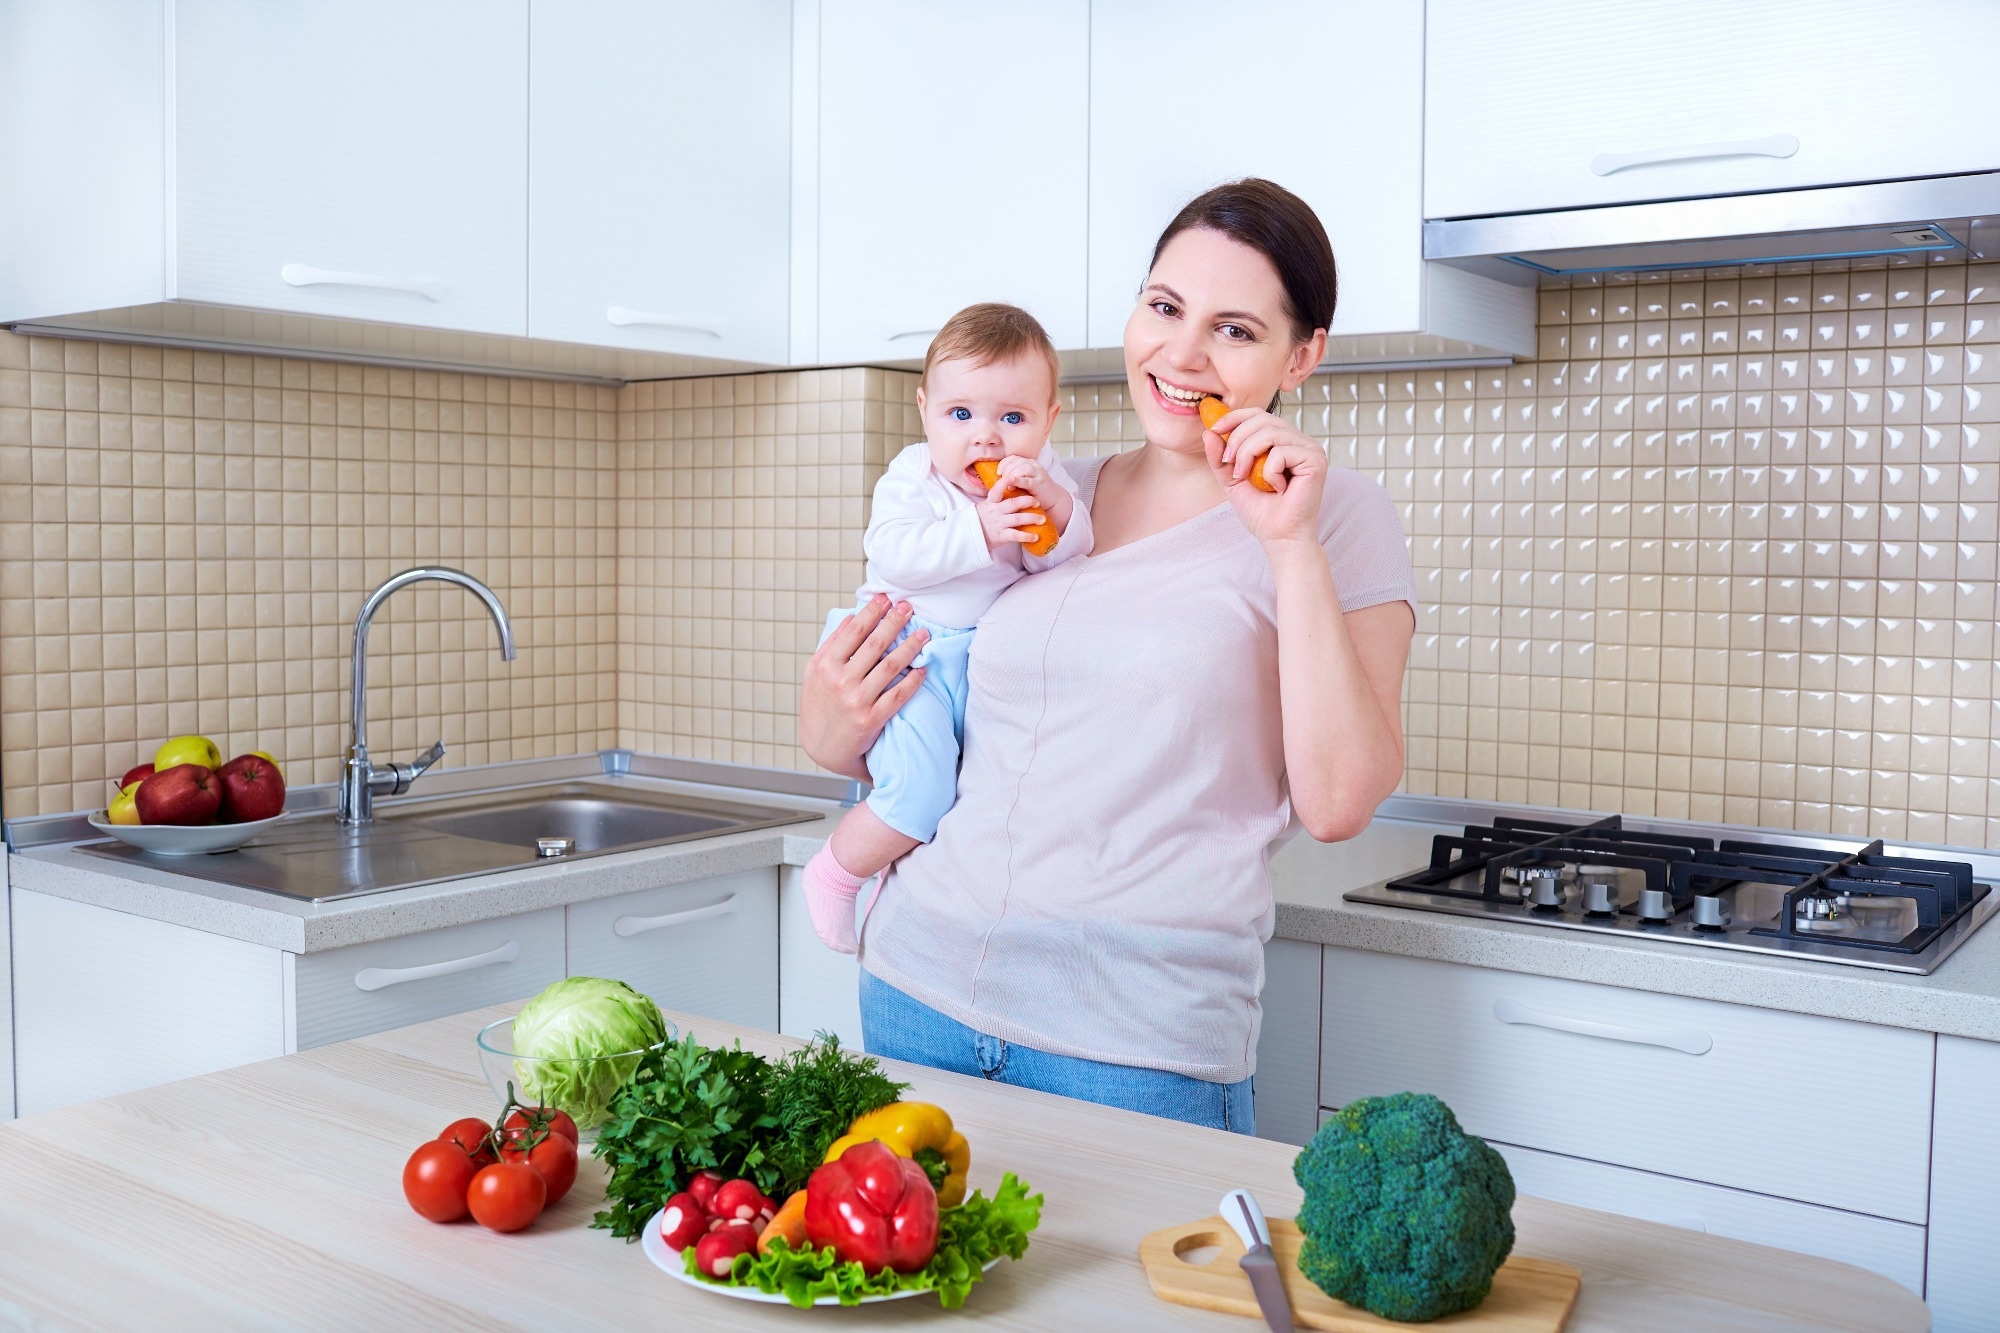 Study: Maternal Obesity and Patterns in Postnatal Diet, Physical Activity and Weight among a Highly Deprived Population in the UK: The GLOWING Pilot Trial. Image Credit: Studio Romantic/Shutterstock.com